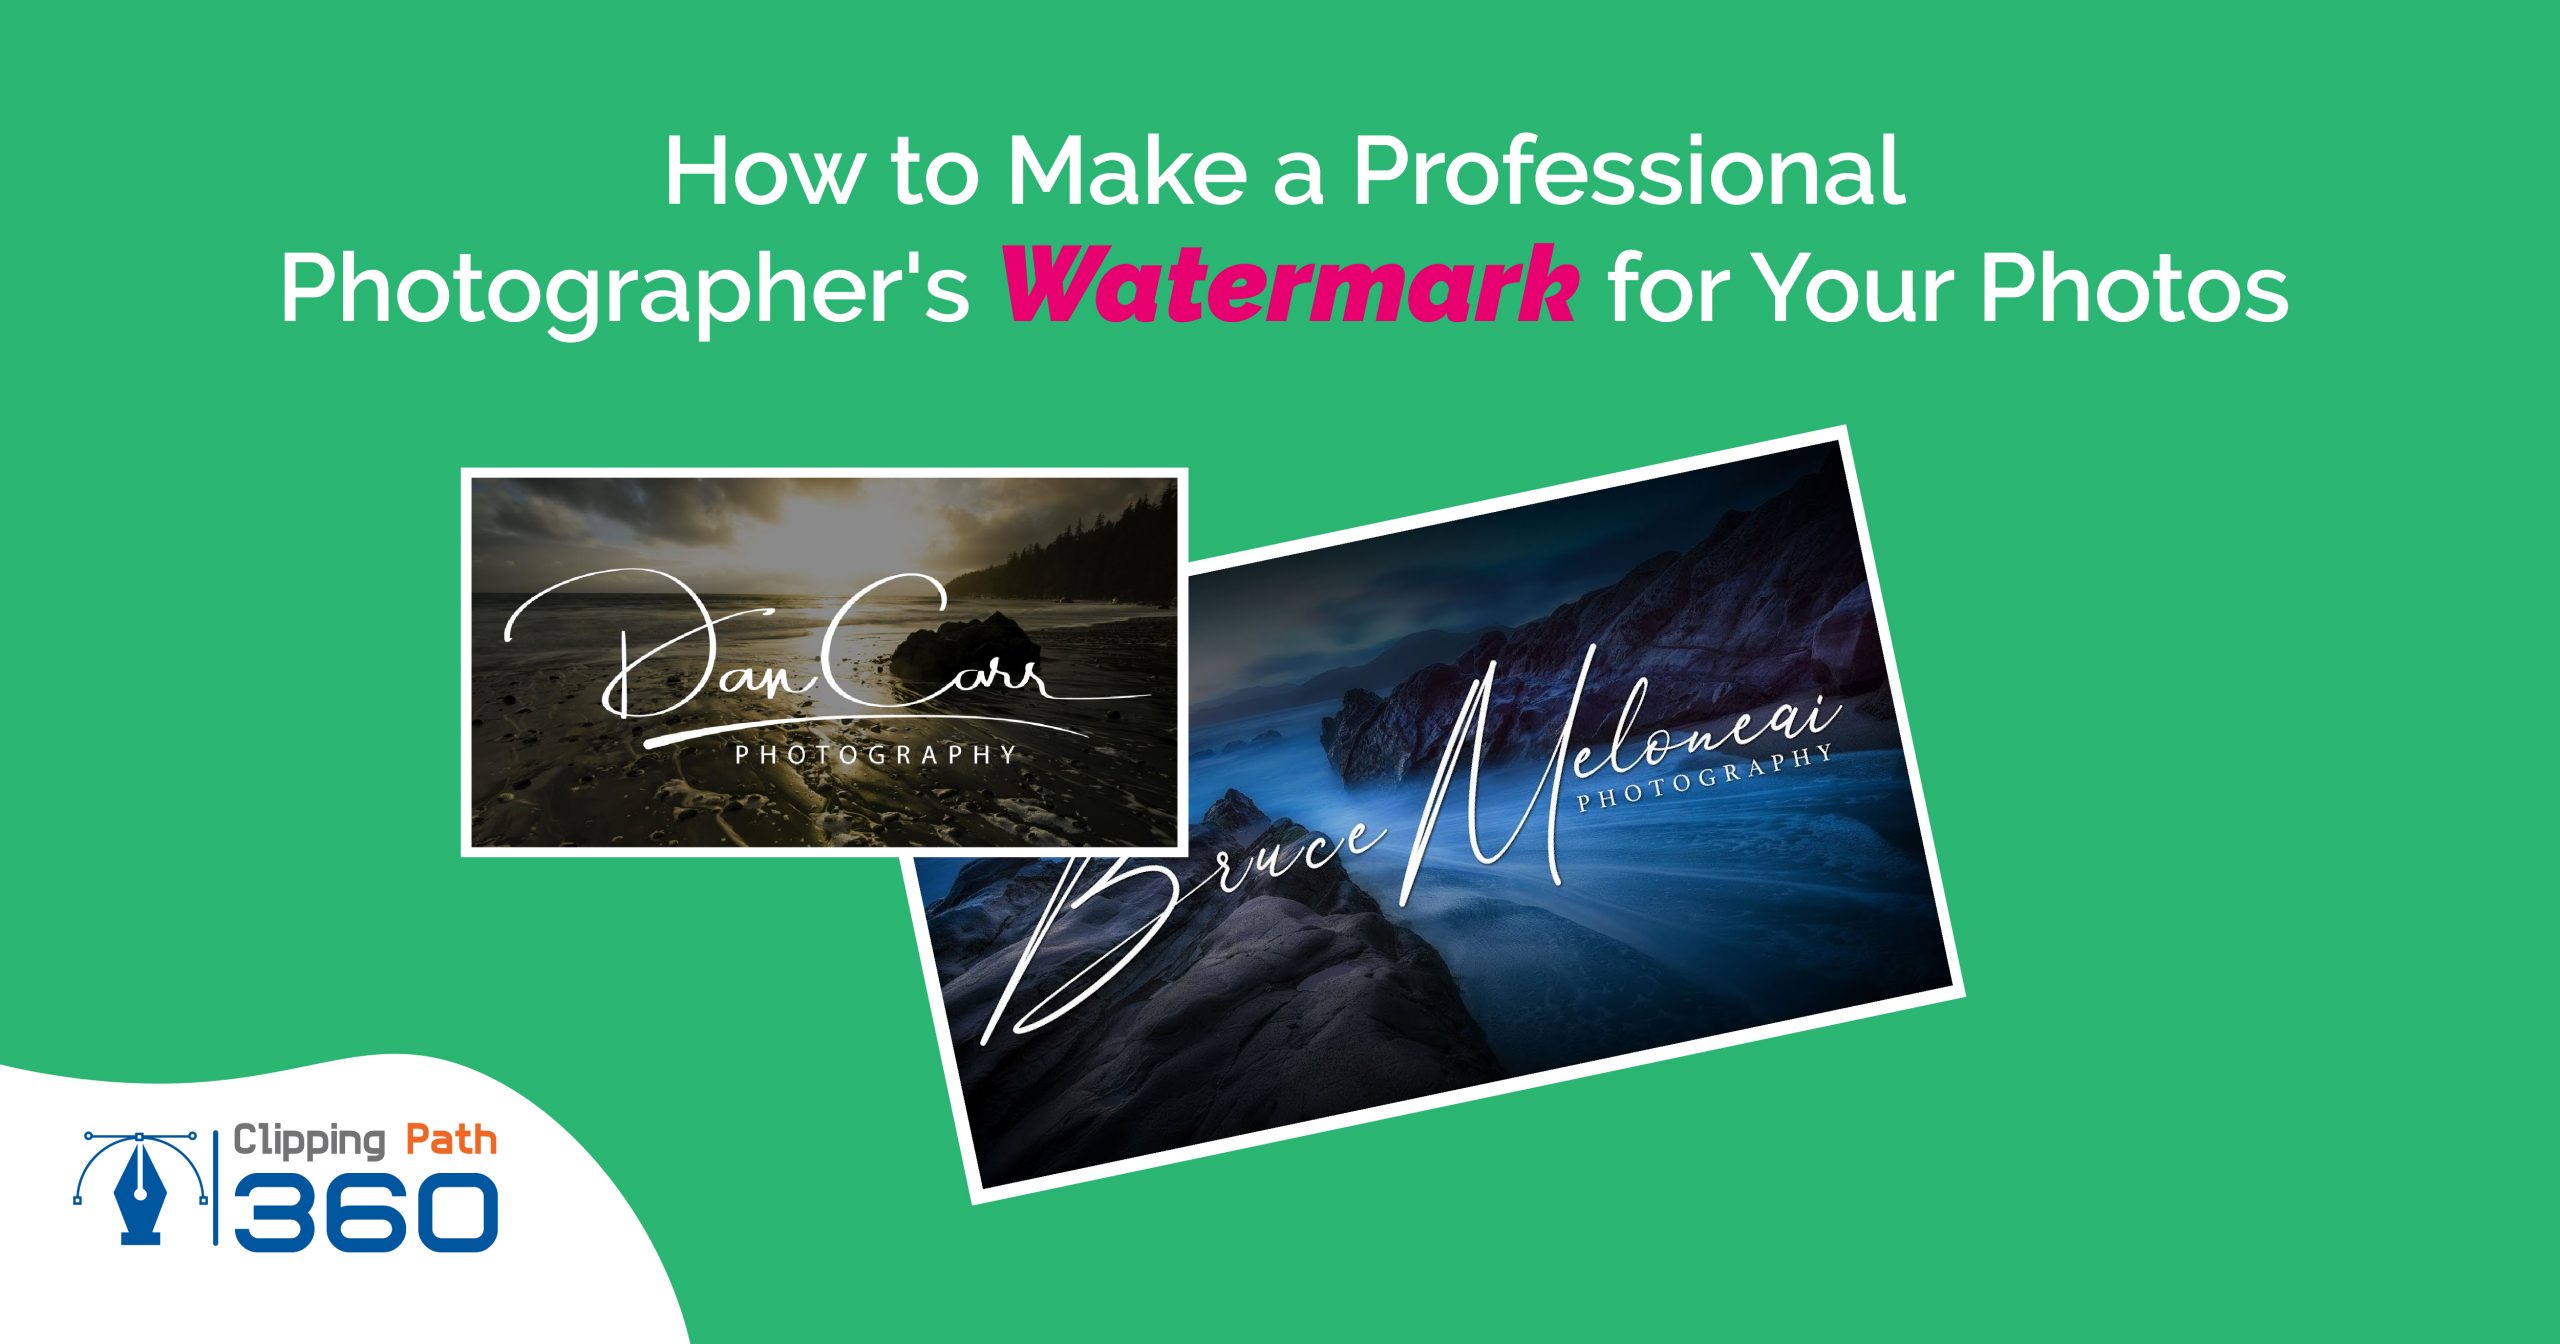 How to Make a Professional Photographer's Watermark